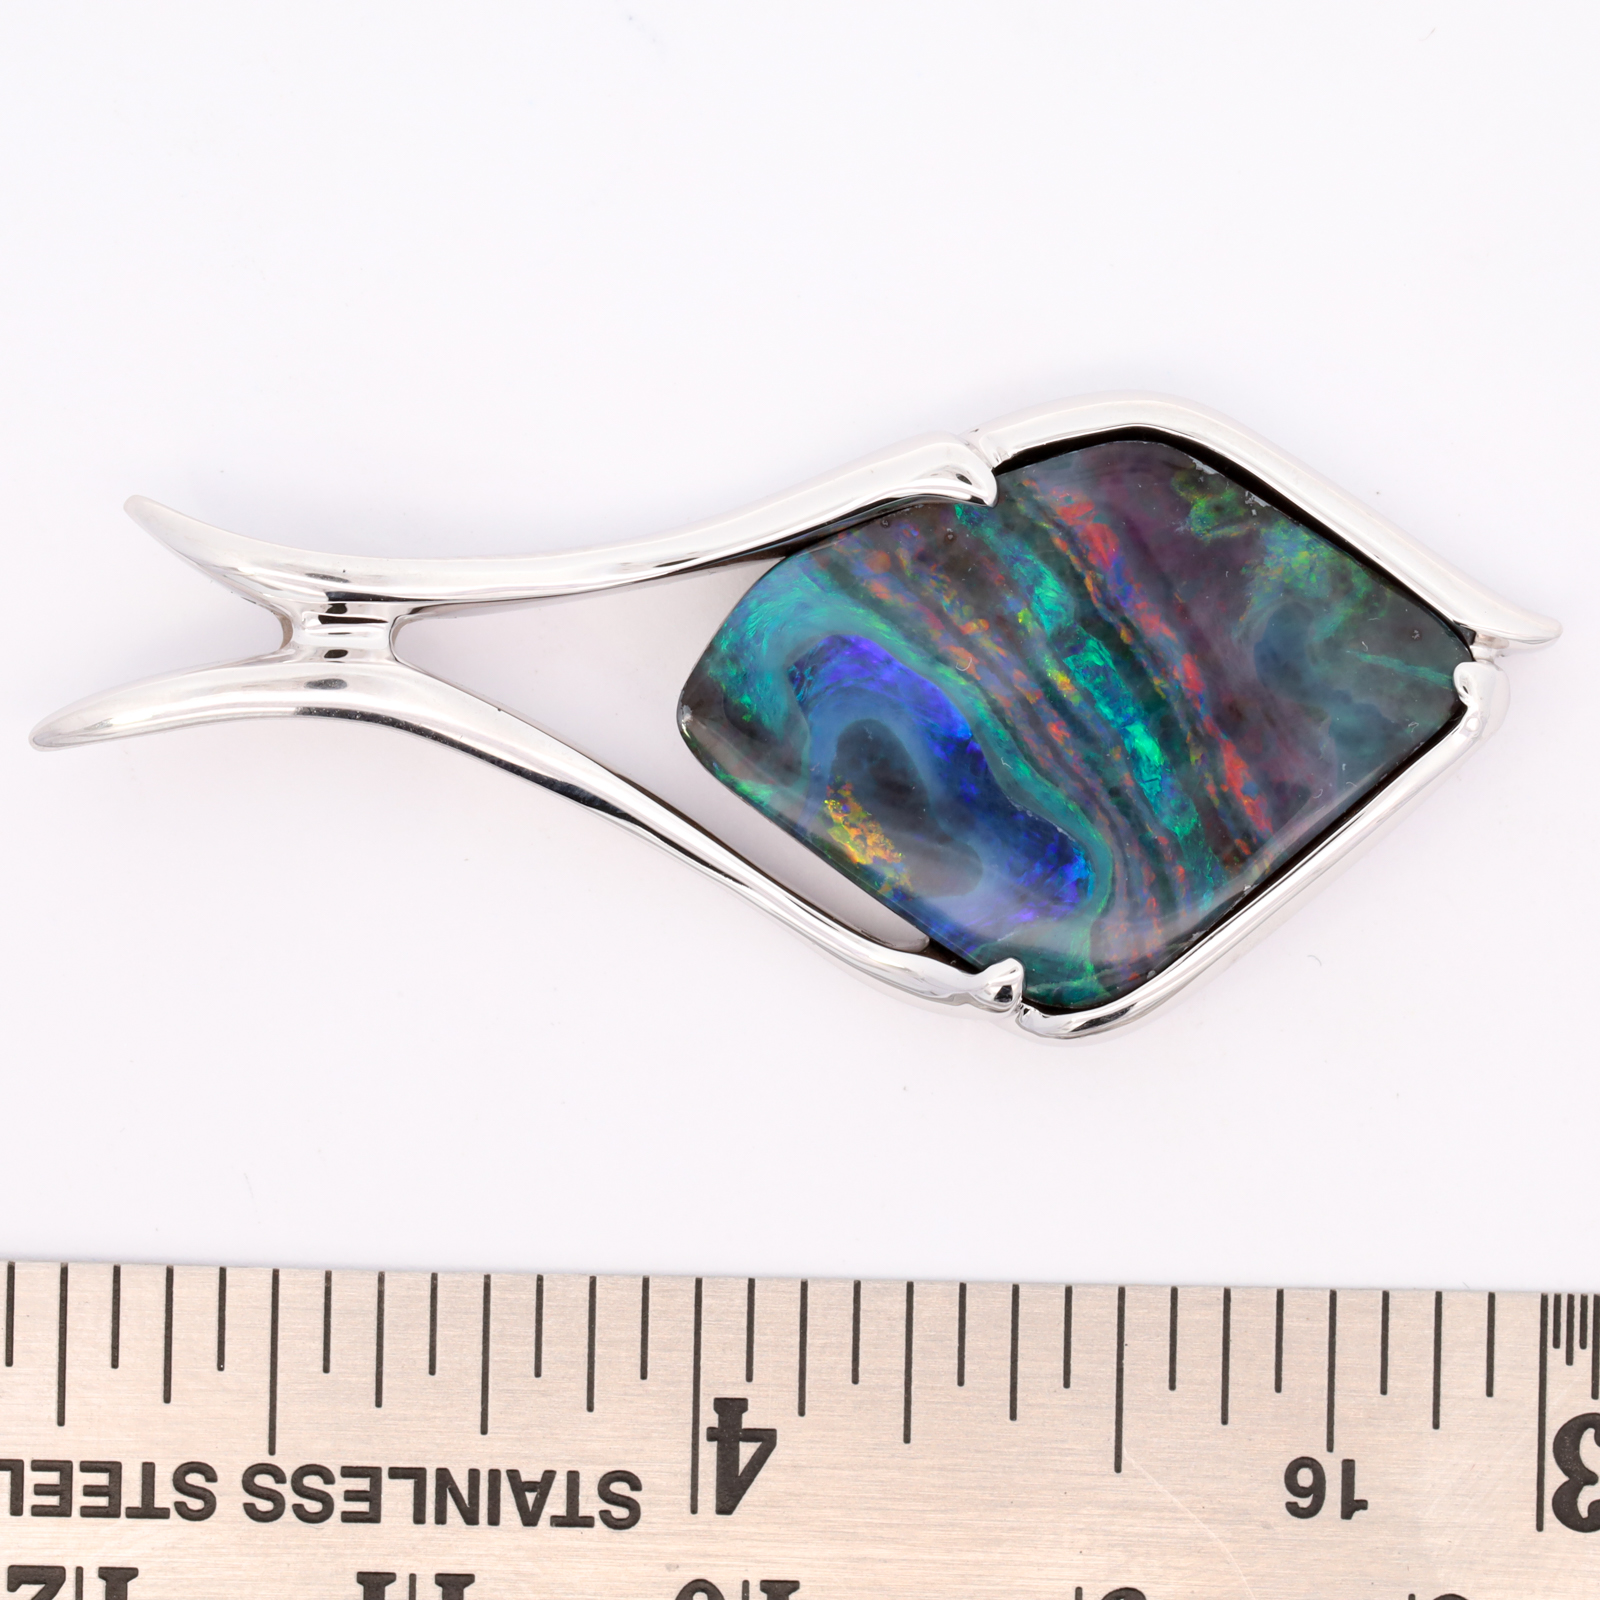 White Gold Blue Green Orange Red Yellow Pink Solid Australian Boulder Opal Necklace Pendant